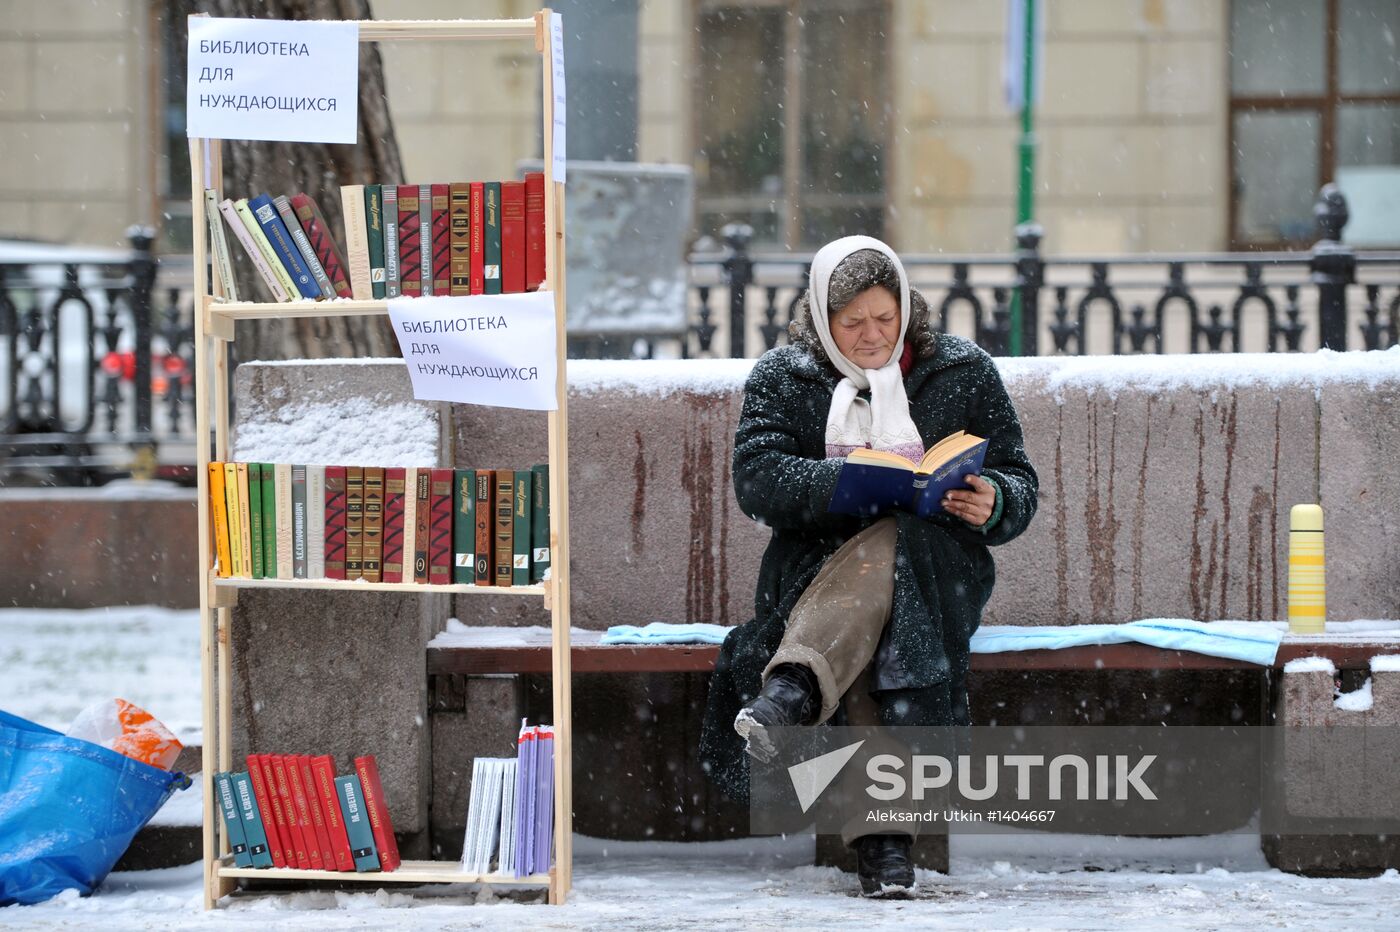 Library for the homeless